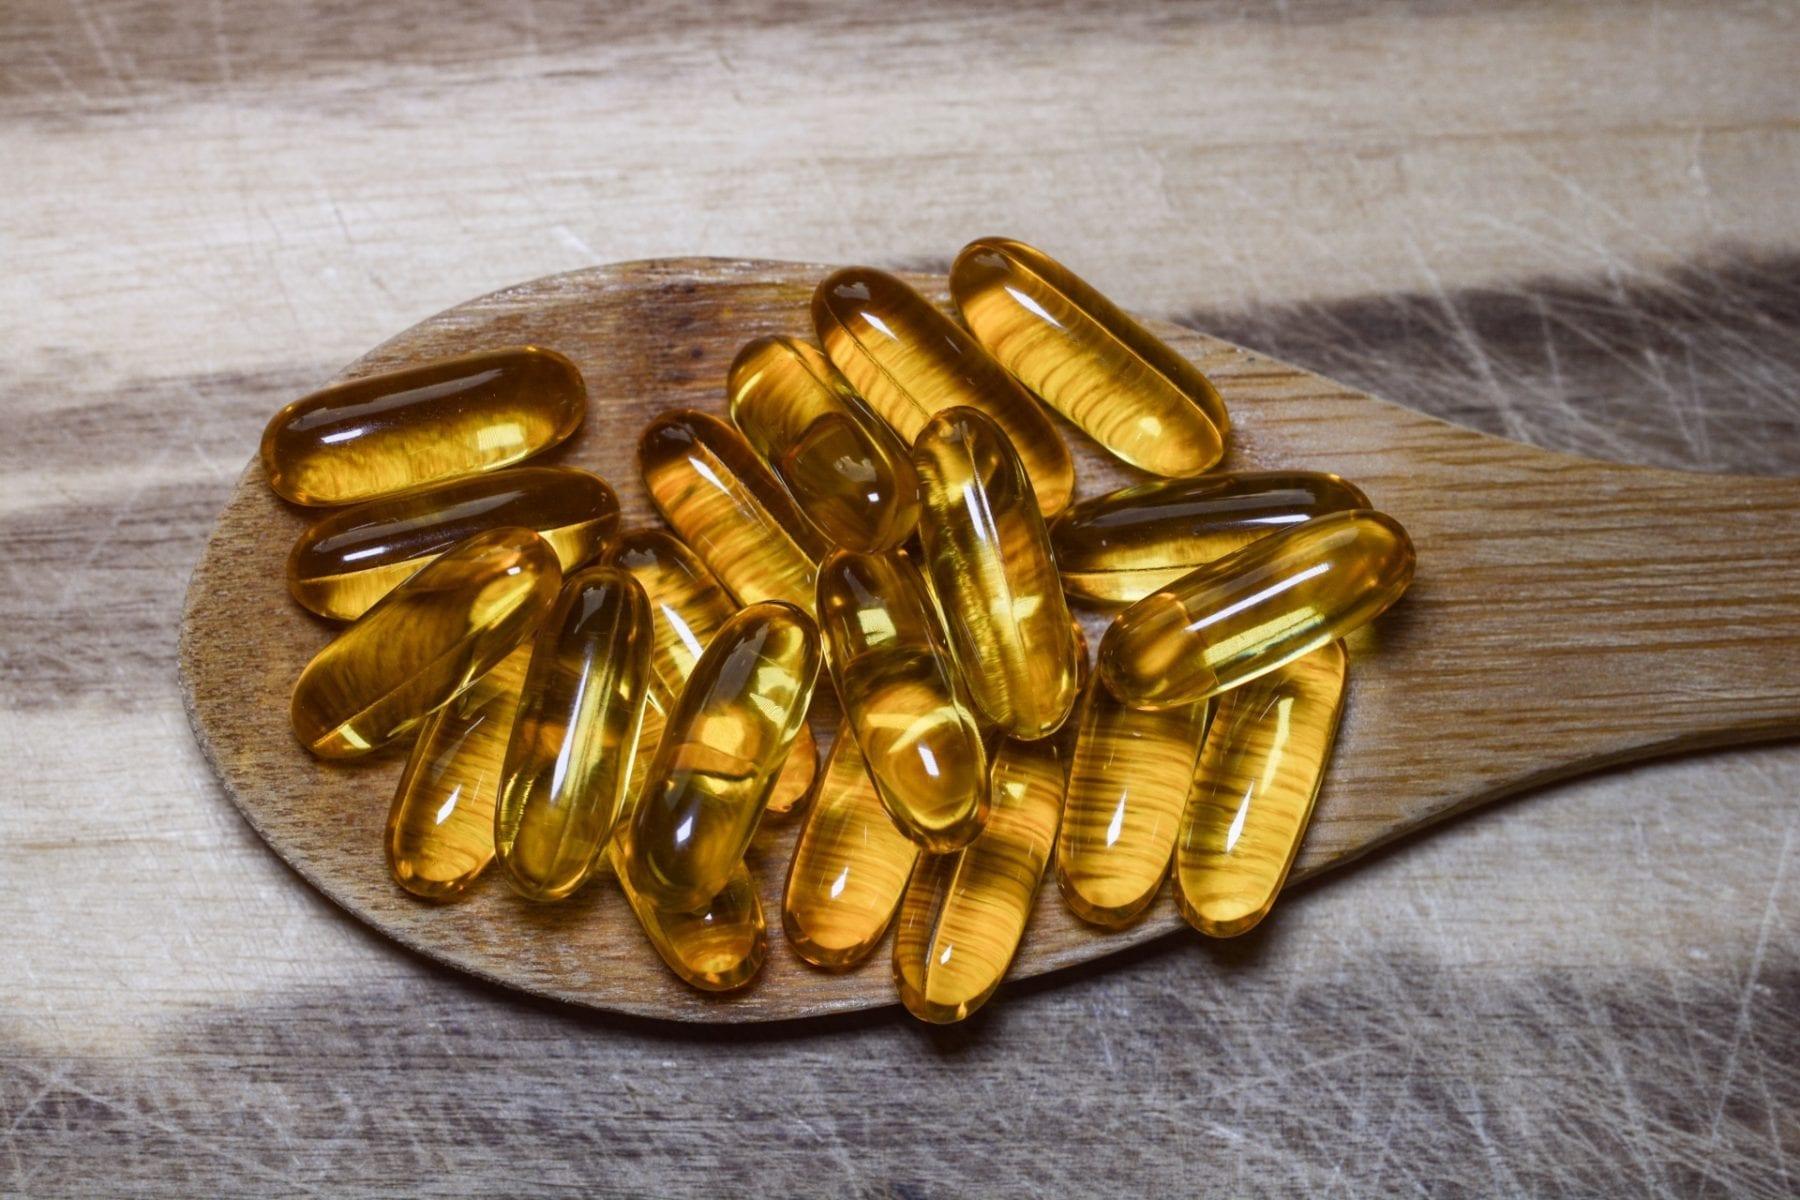 10 Best Vitamins & Supplements For Energy